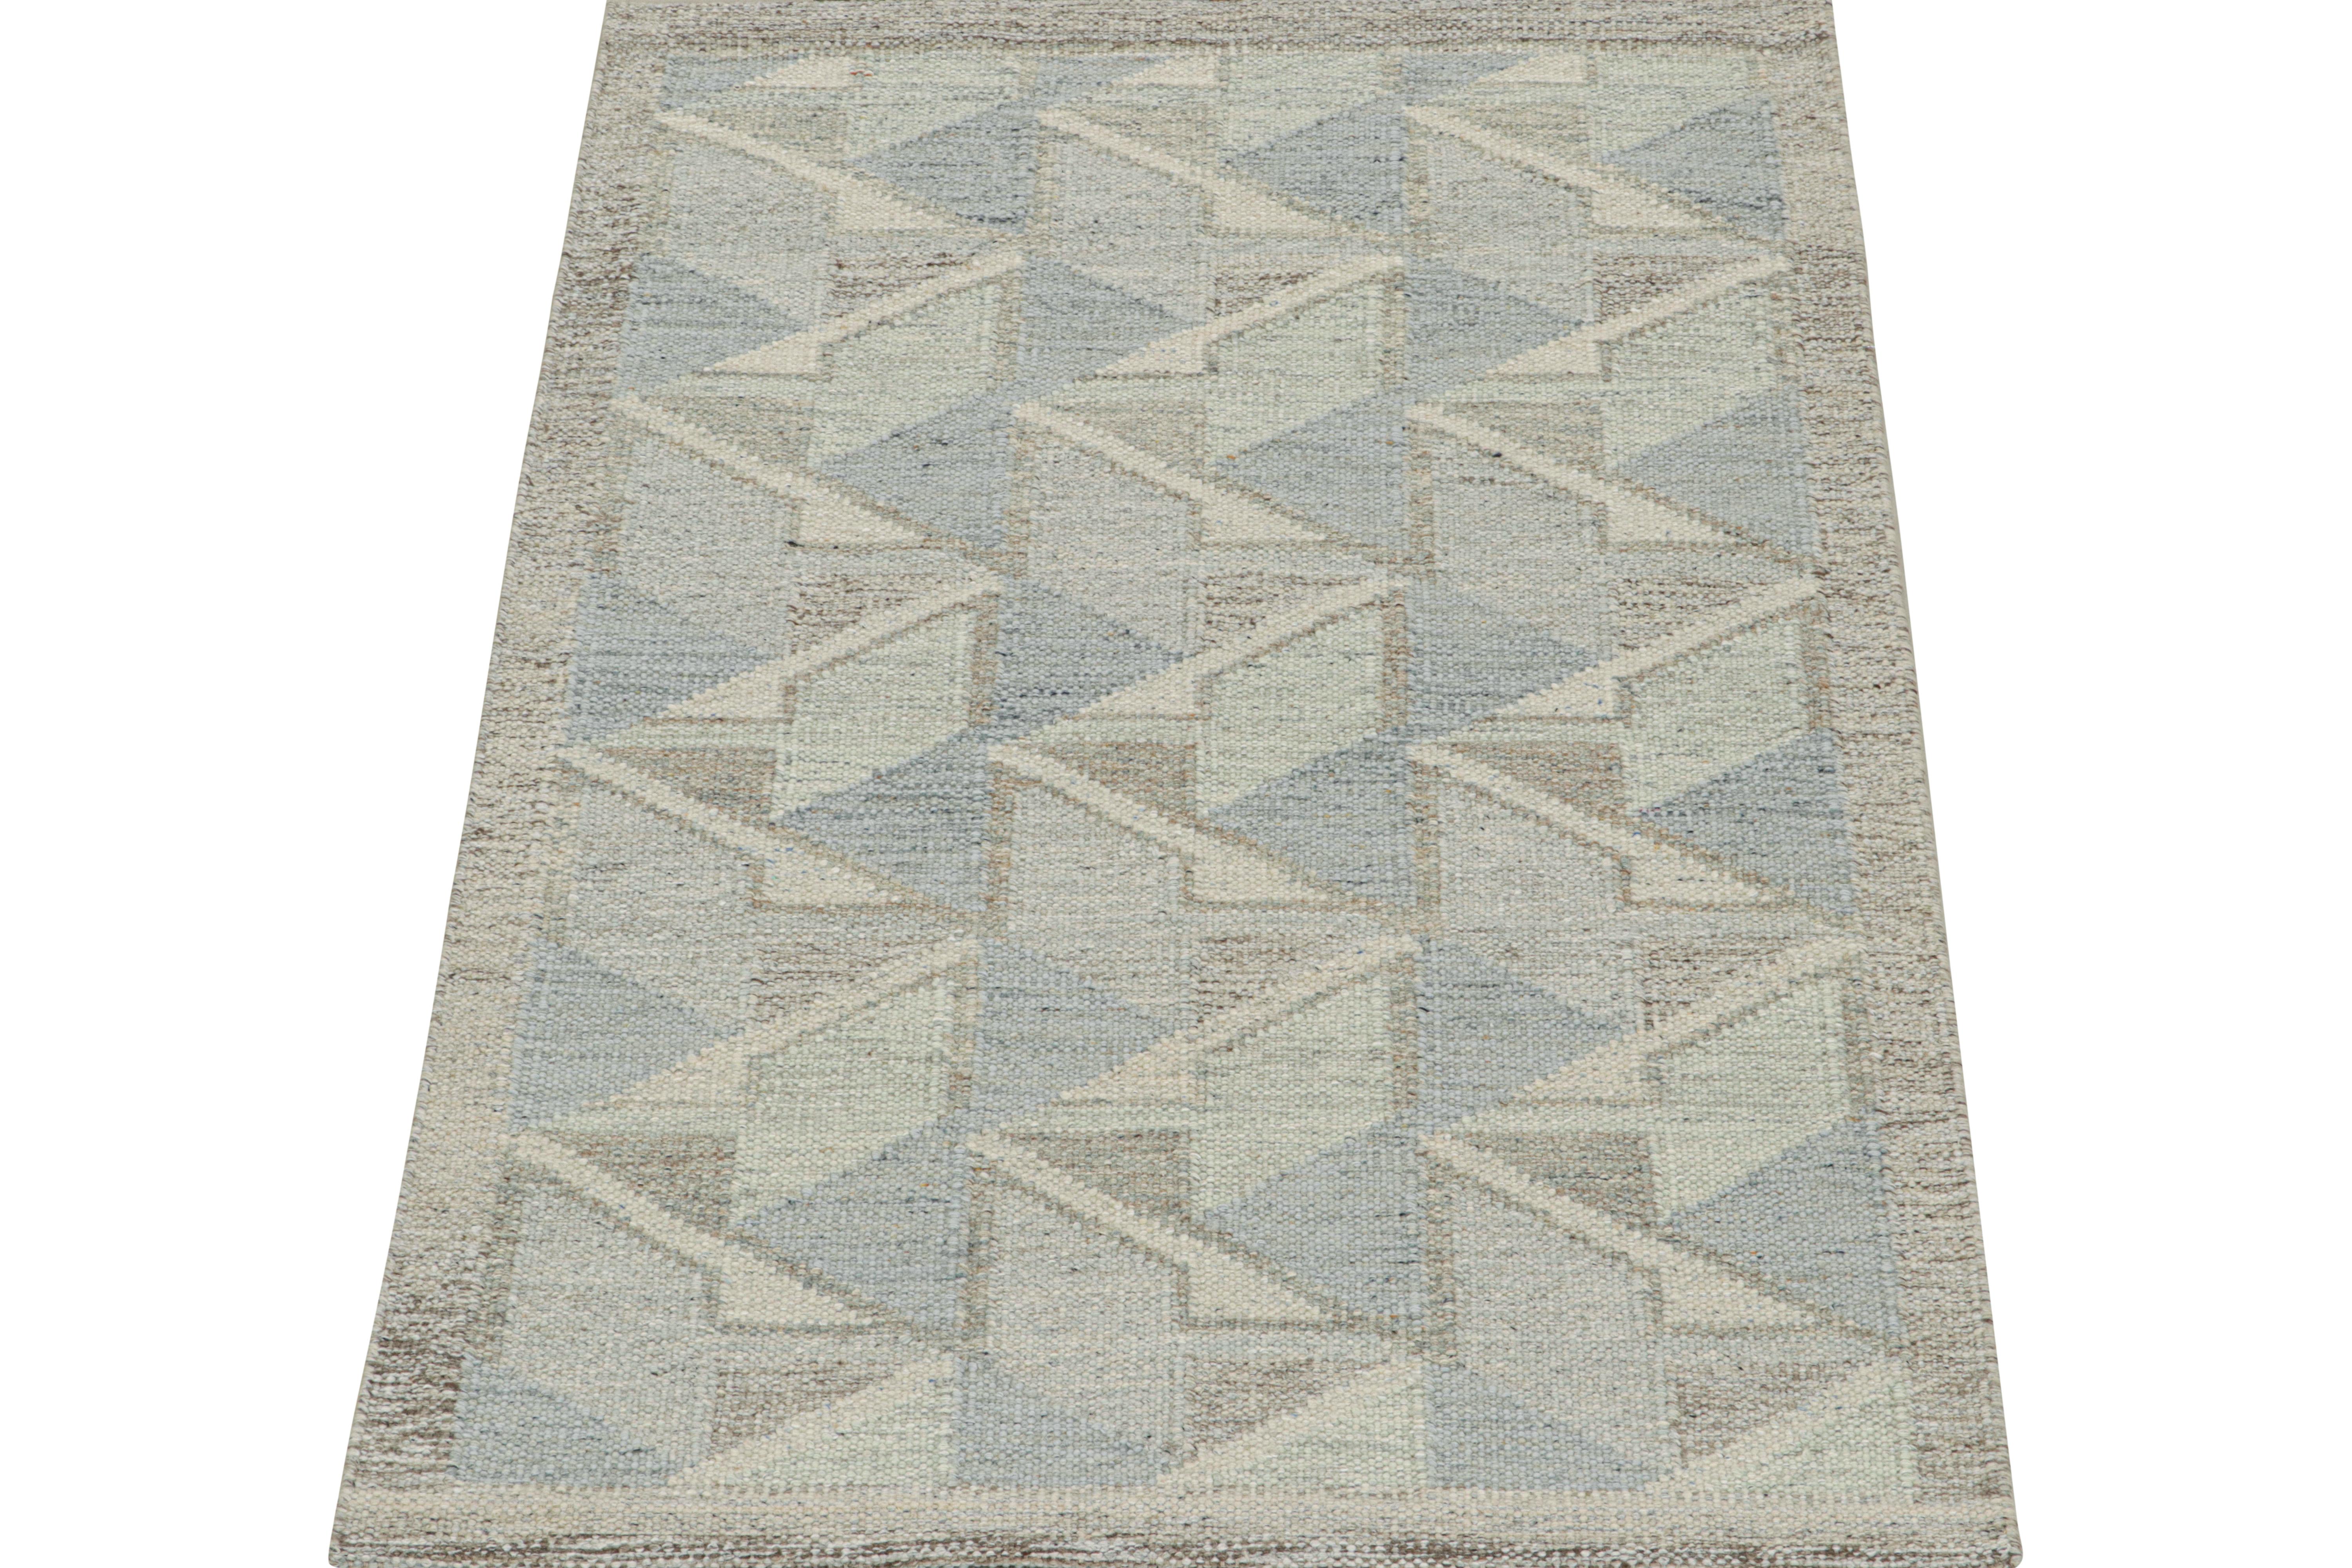 This 4x6 flat weave is a new addition to the Scandinavian Kilim collection by Rug & Kilim. Handwoven in wool and natural yarns, its design reflects a contemporary take on mid-century Rollakans and Swedish Deco style.

On the design:

This new